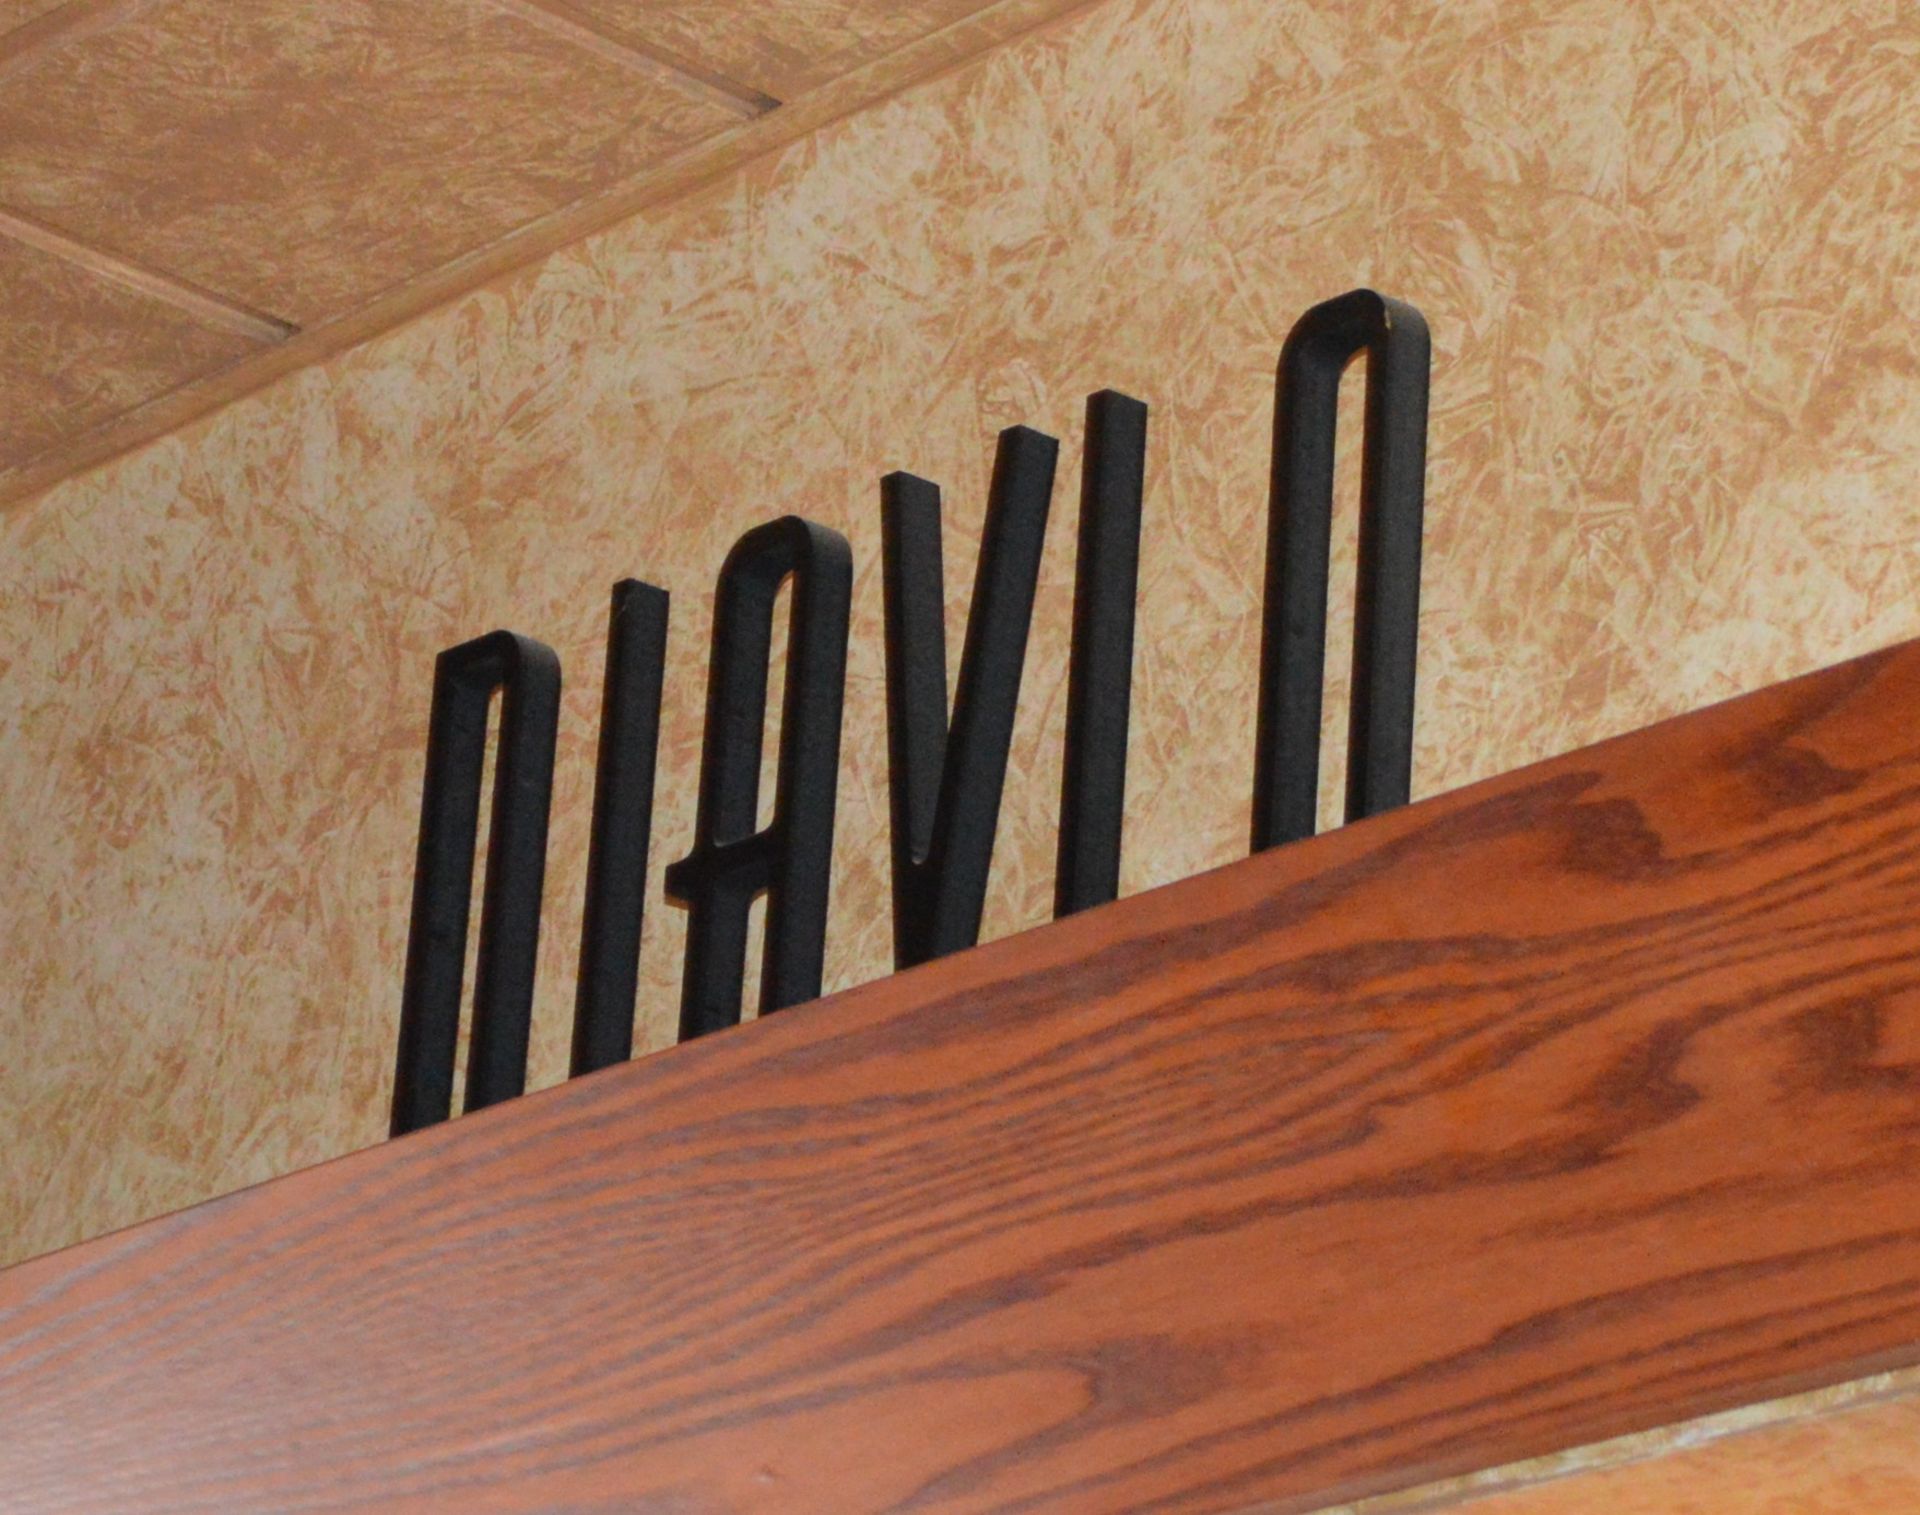 7 x Wooden Signs Suitable For Restaurants, Cafes, Bistros etc - Includes Ceasers Salad, Diavlo, - Image 6 of 9